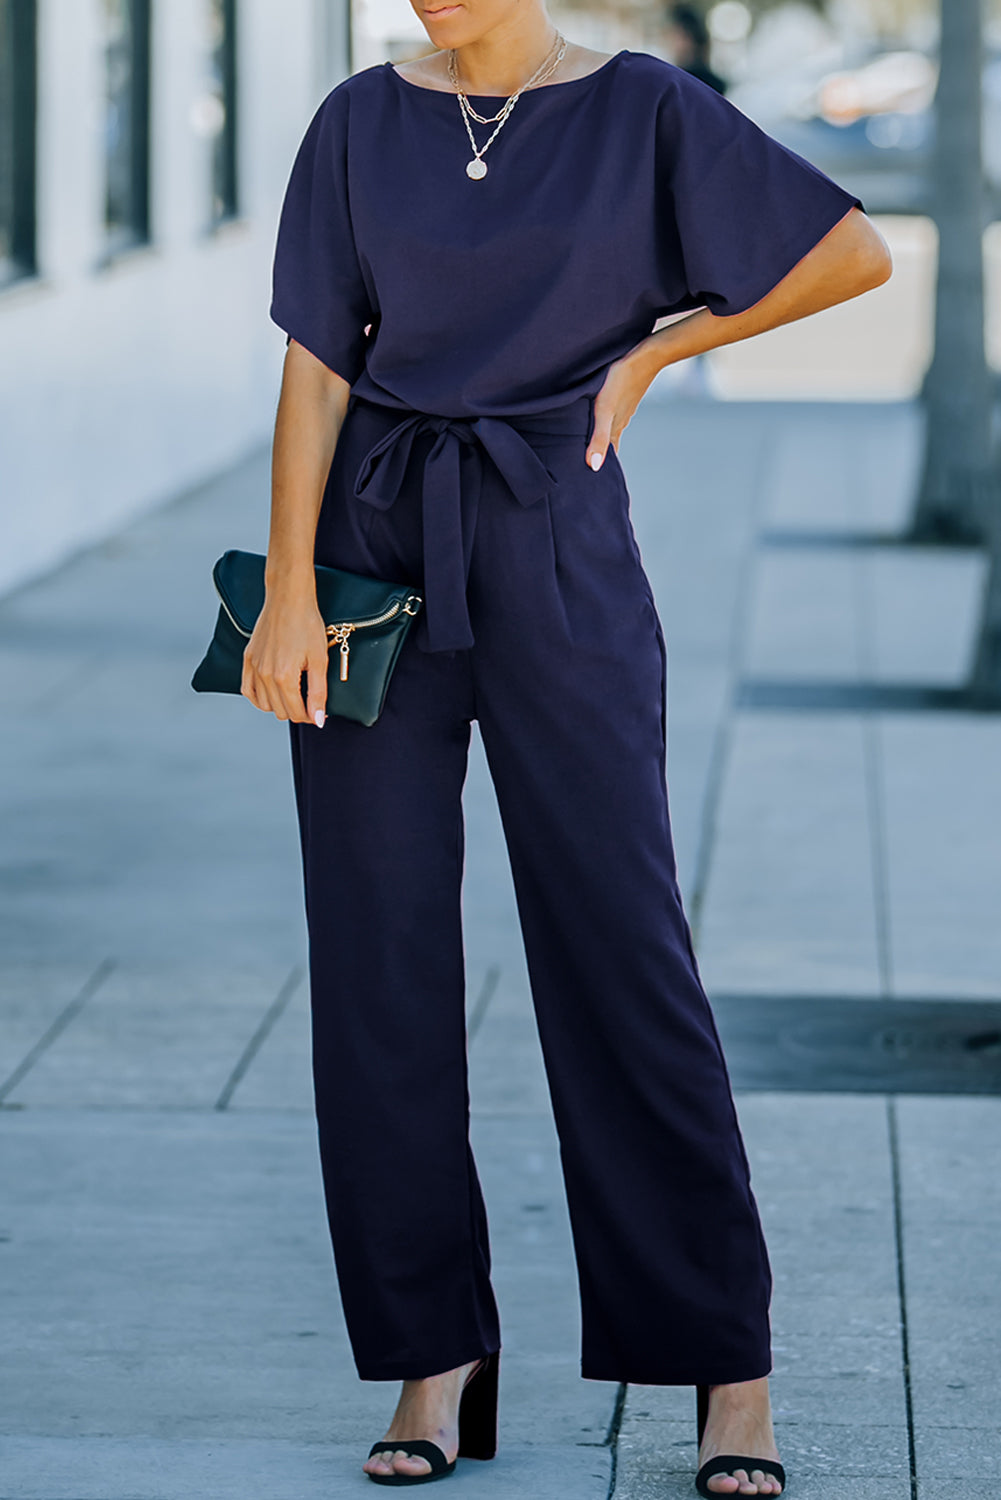 Gray Oh So Glam Belted Wide Leg Jumpsuit